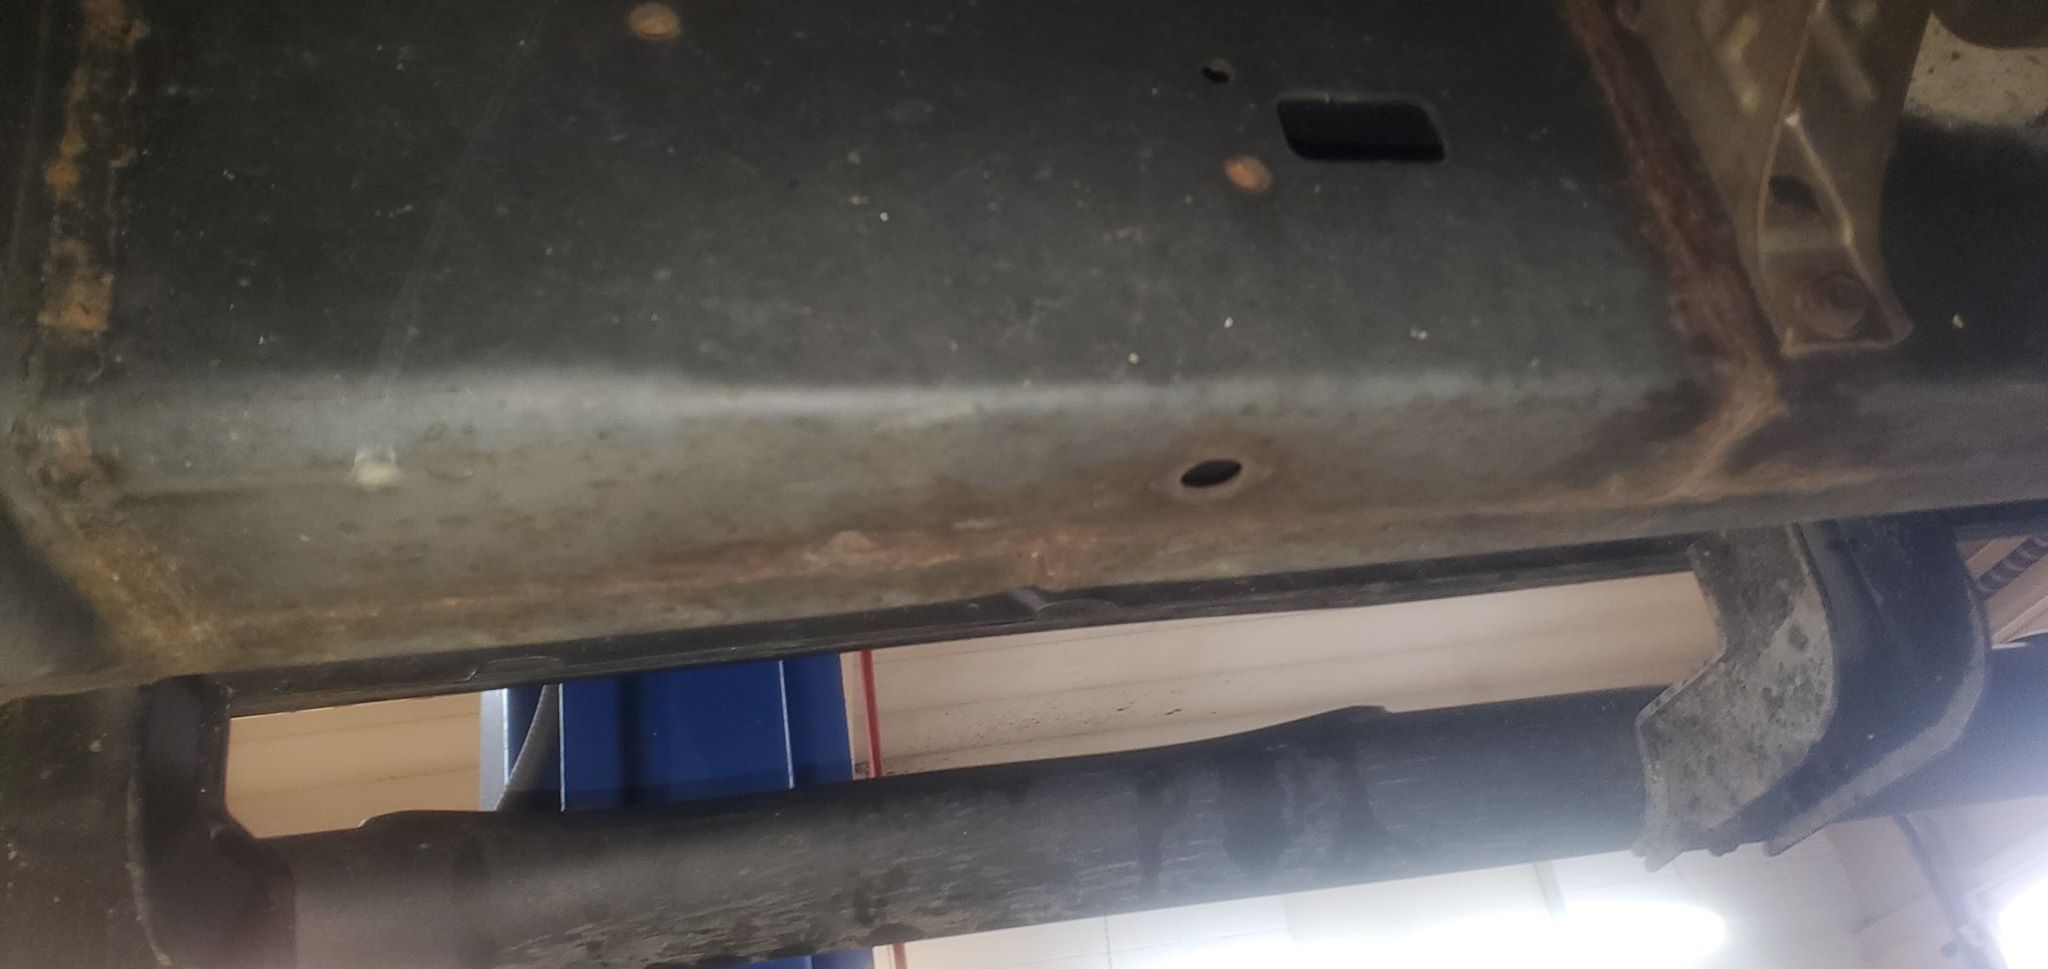 How much is too much rust on a 2006 4Runner?-82176235_487317911923394_4328639302729728000_n-jpg